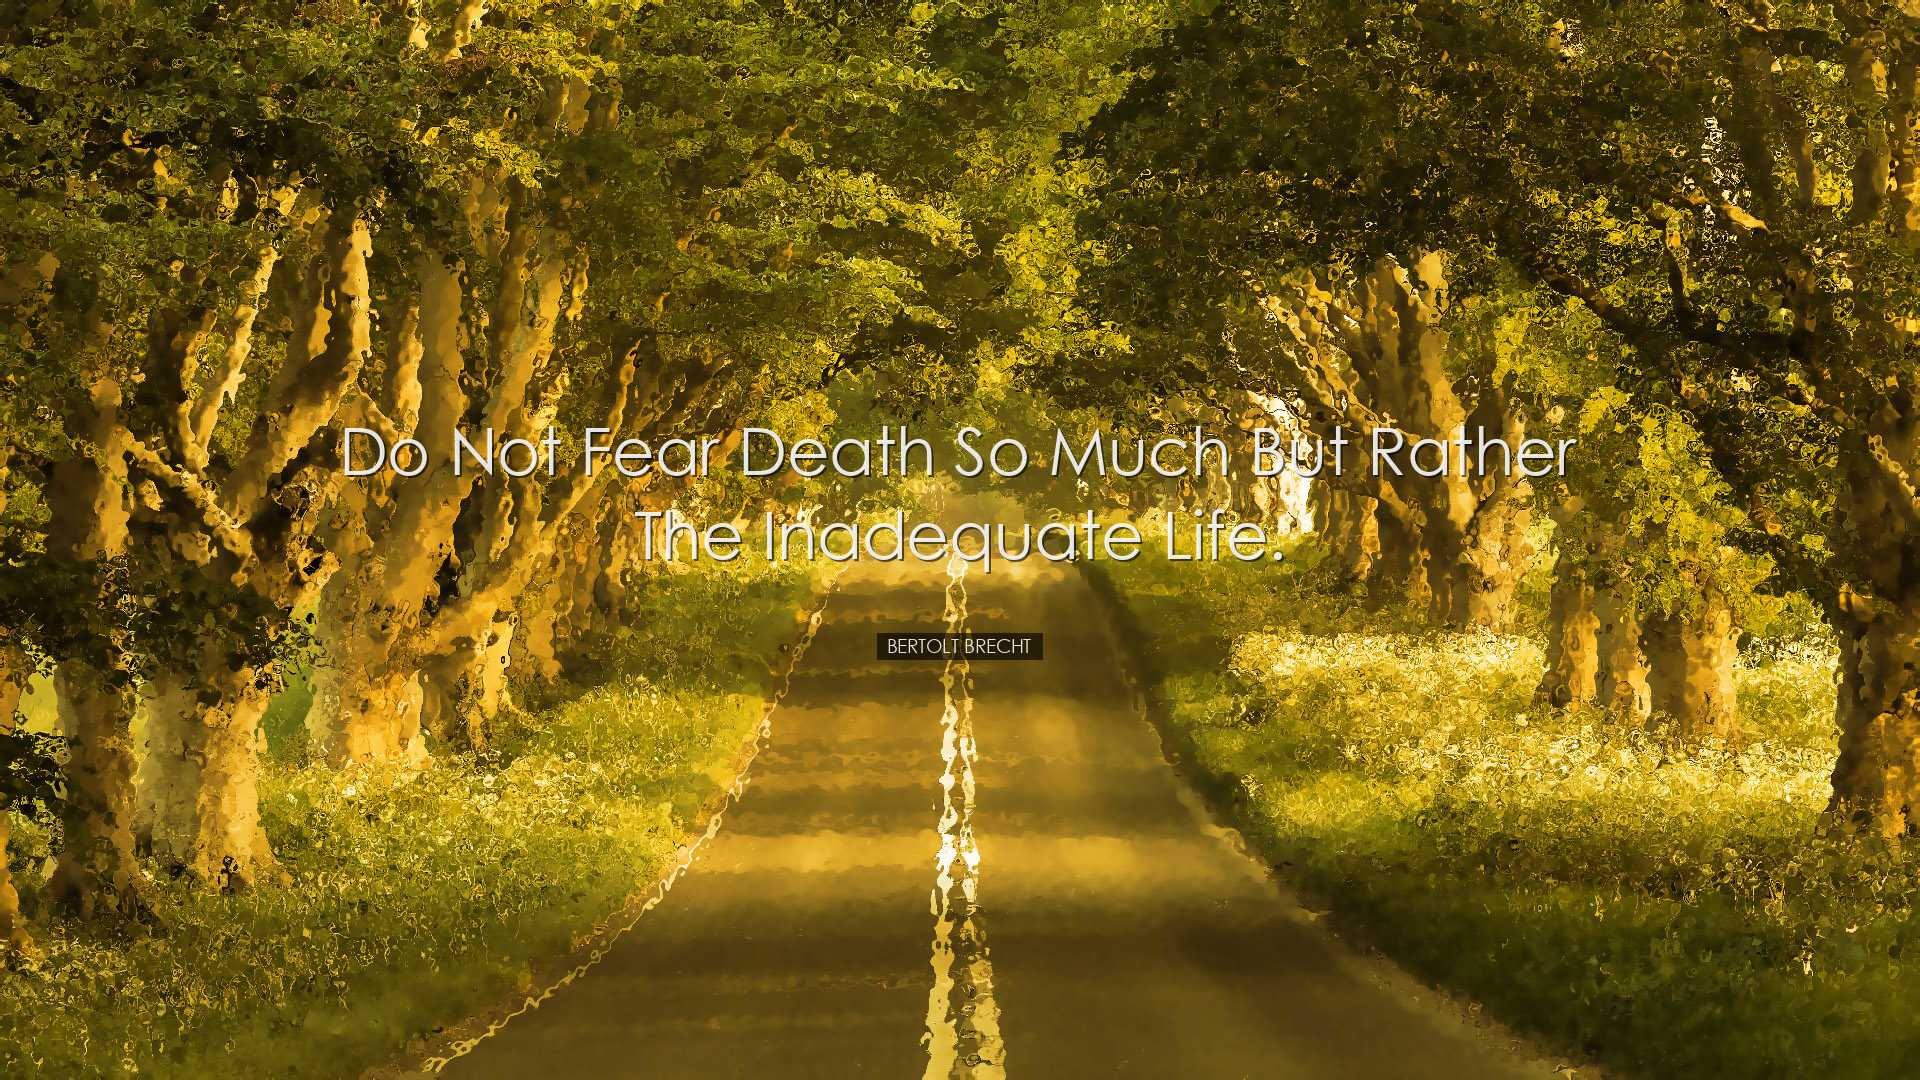 Do not fear death so much but rather the inadequate life. - Bertol